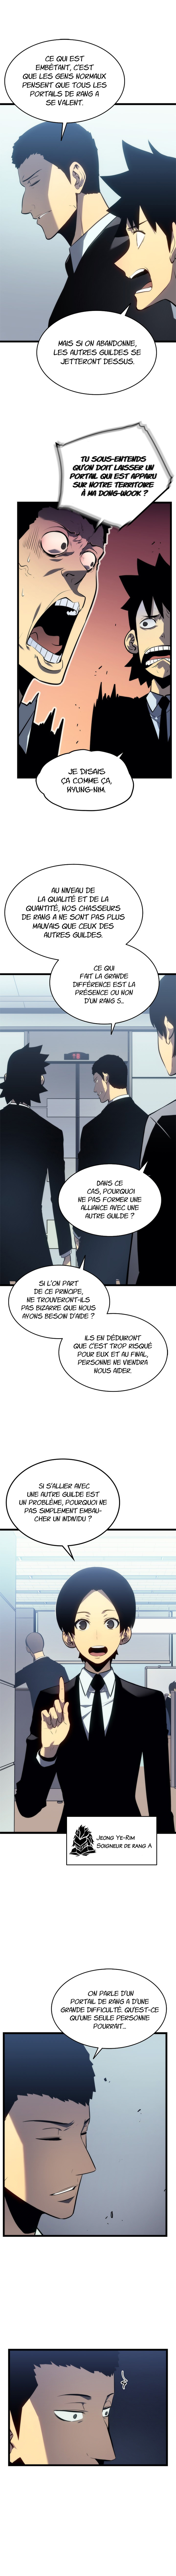 Solo Leveling: Chapter chapitre-116 - Page 2